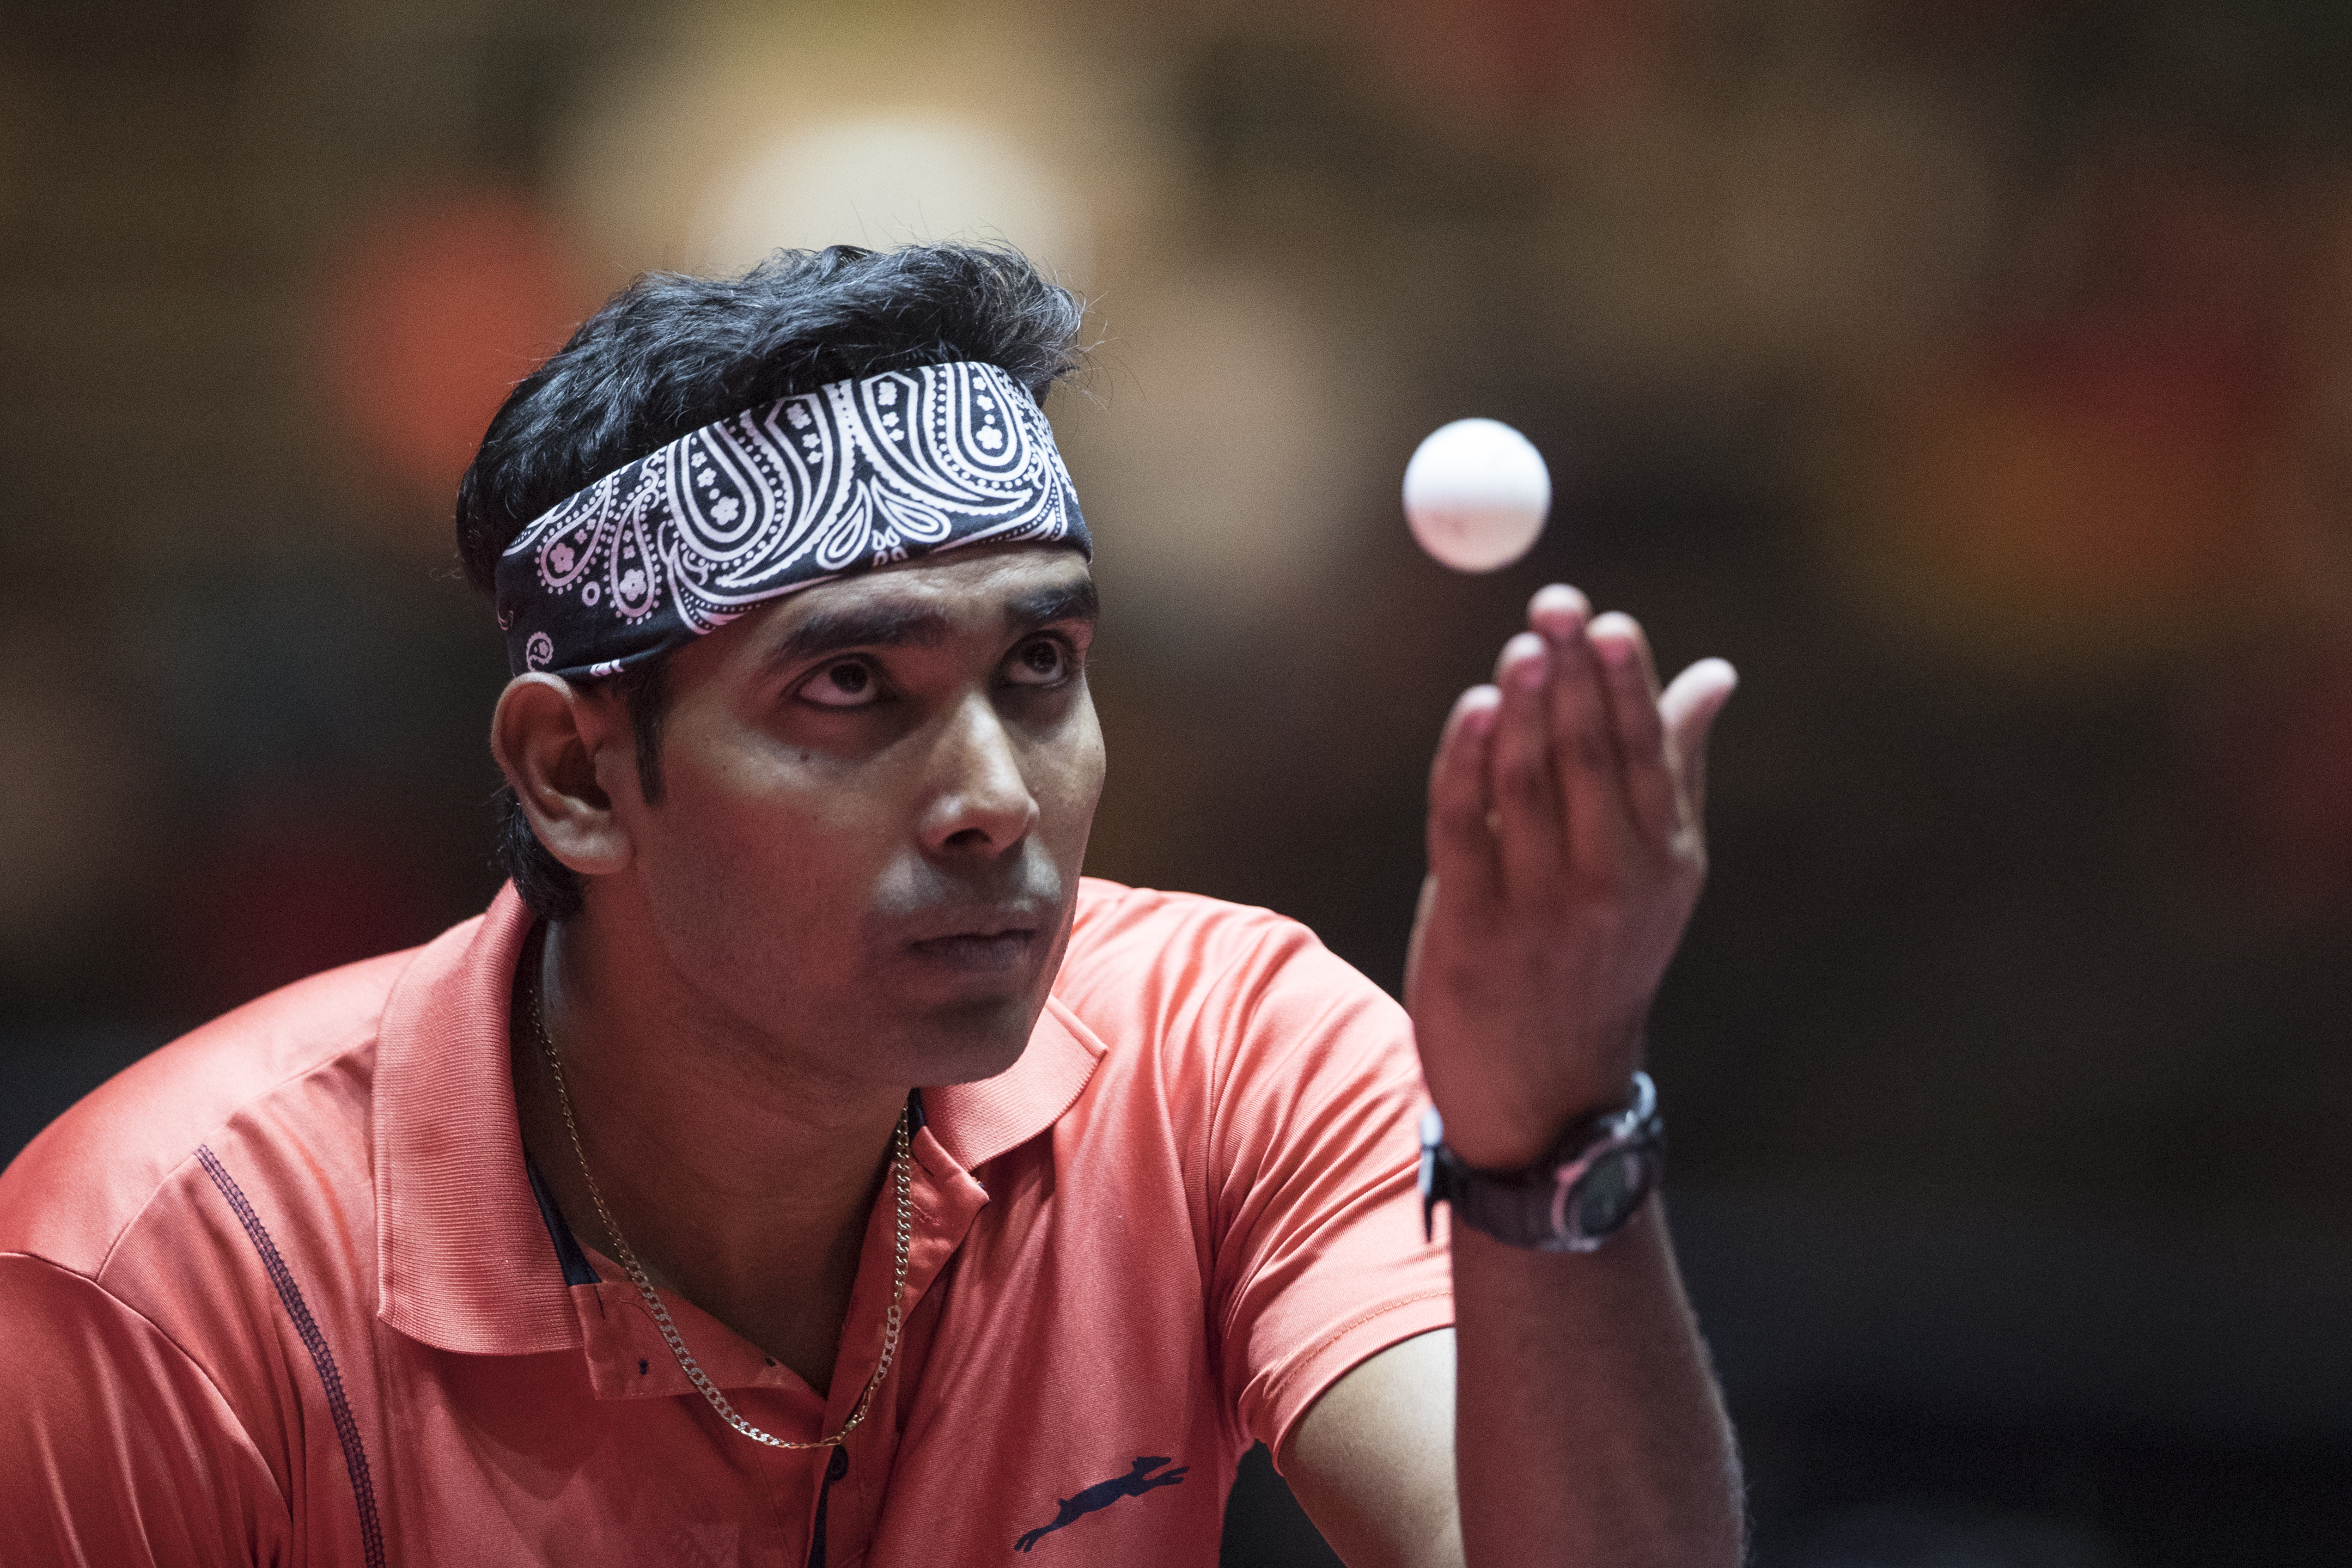 10-member Indian table tennis team to train in Portugal ahead of CWG 2022